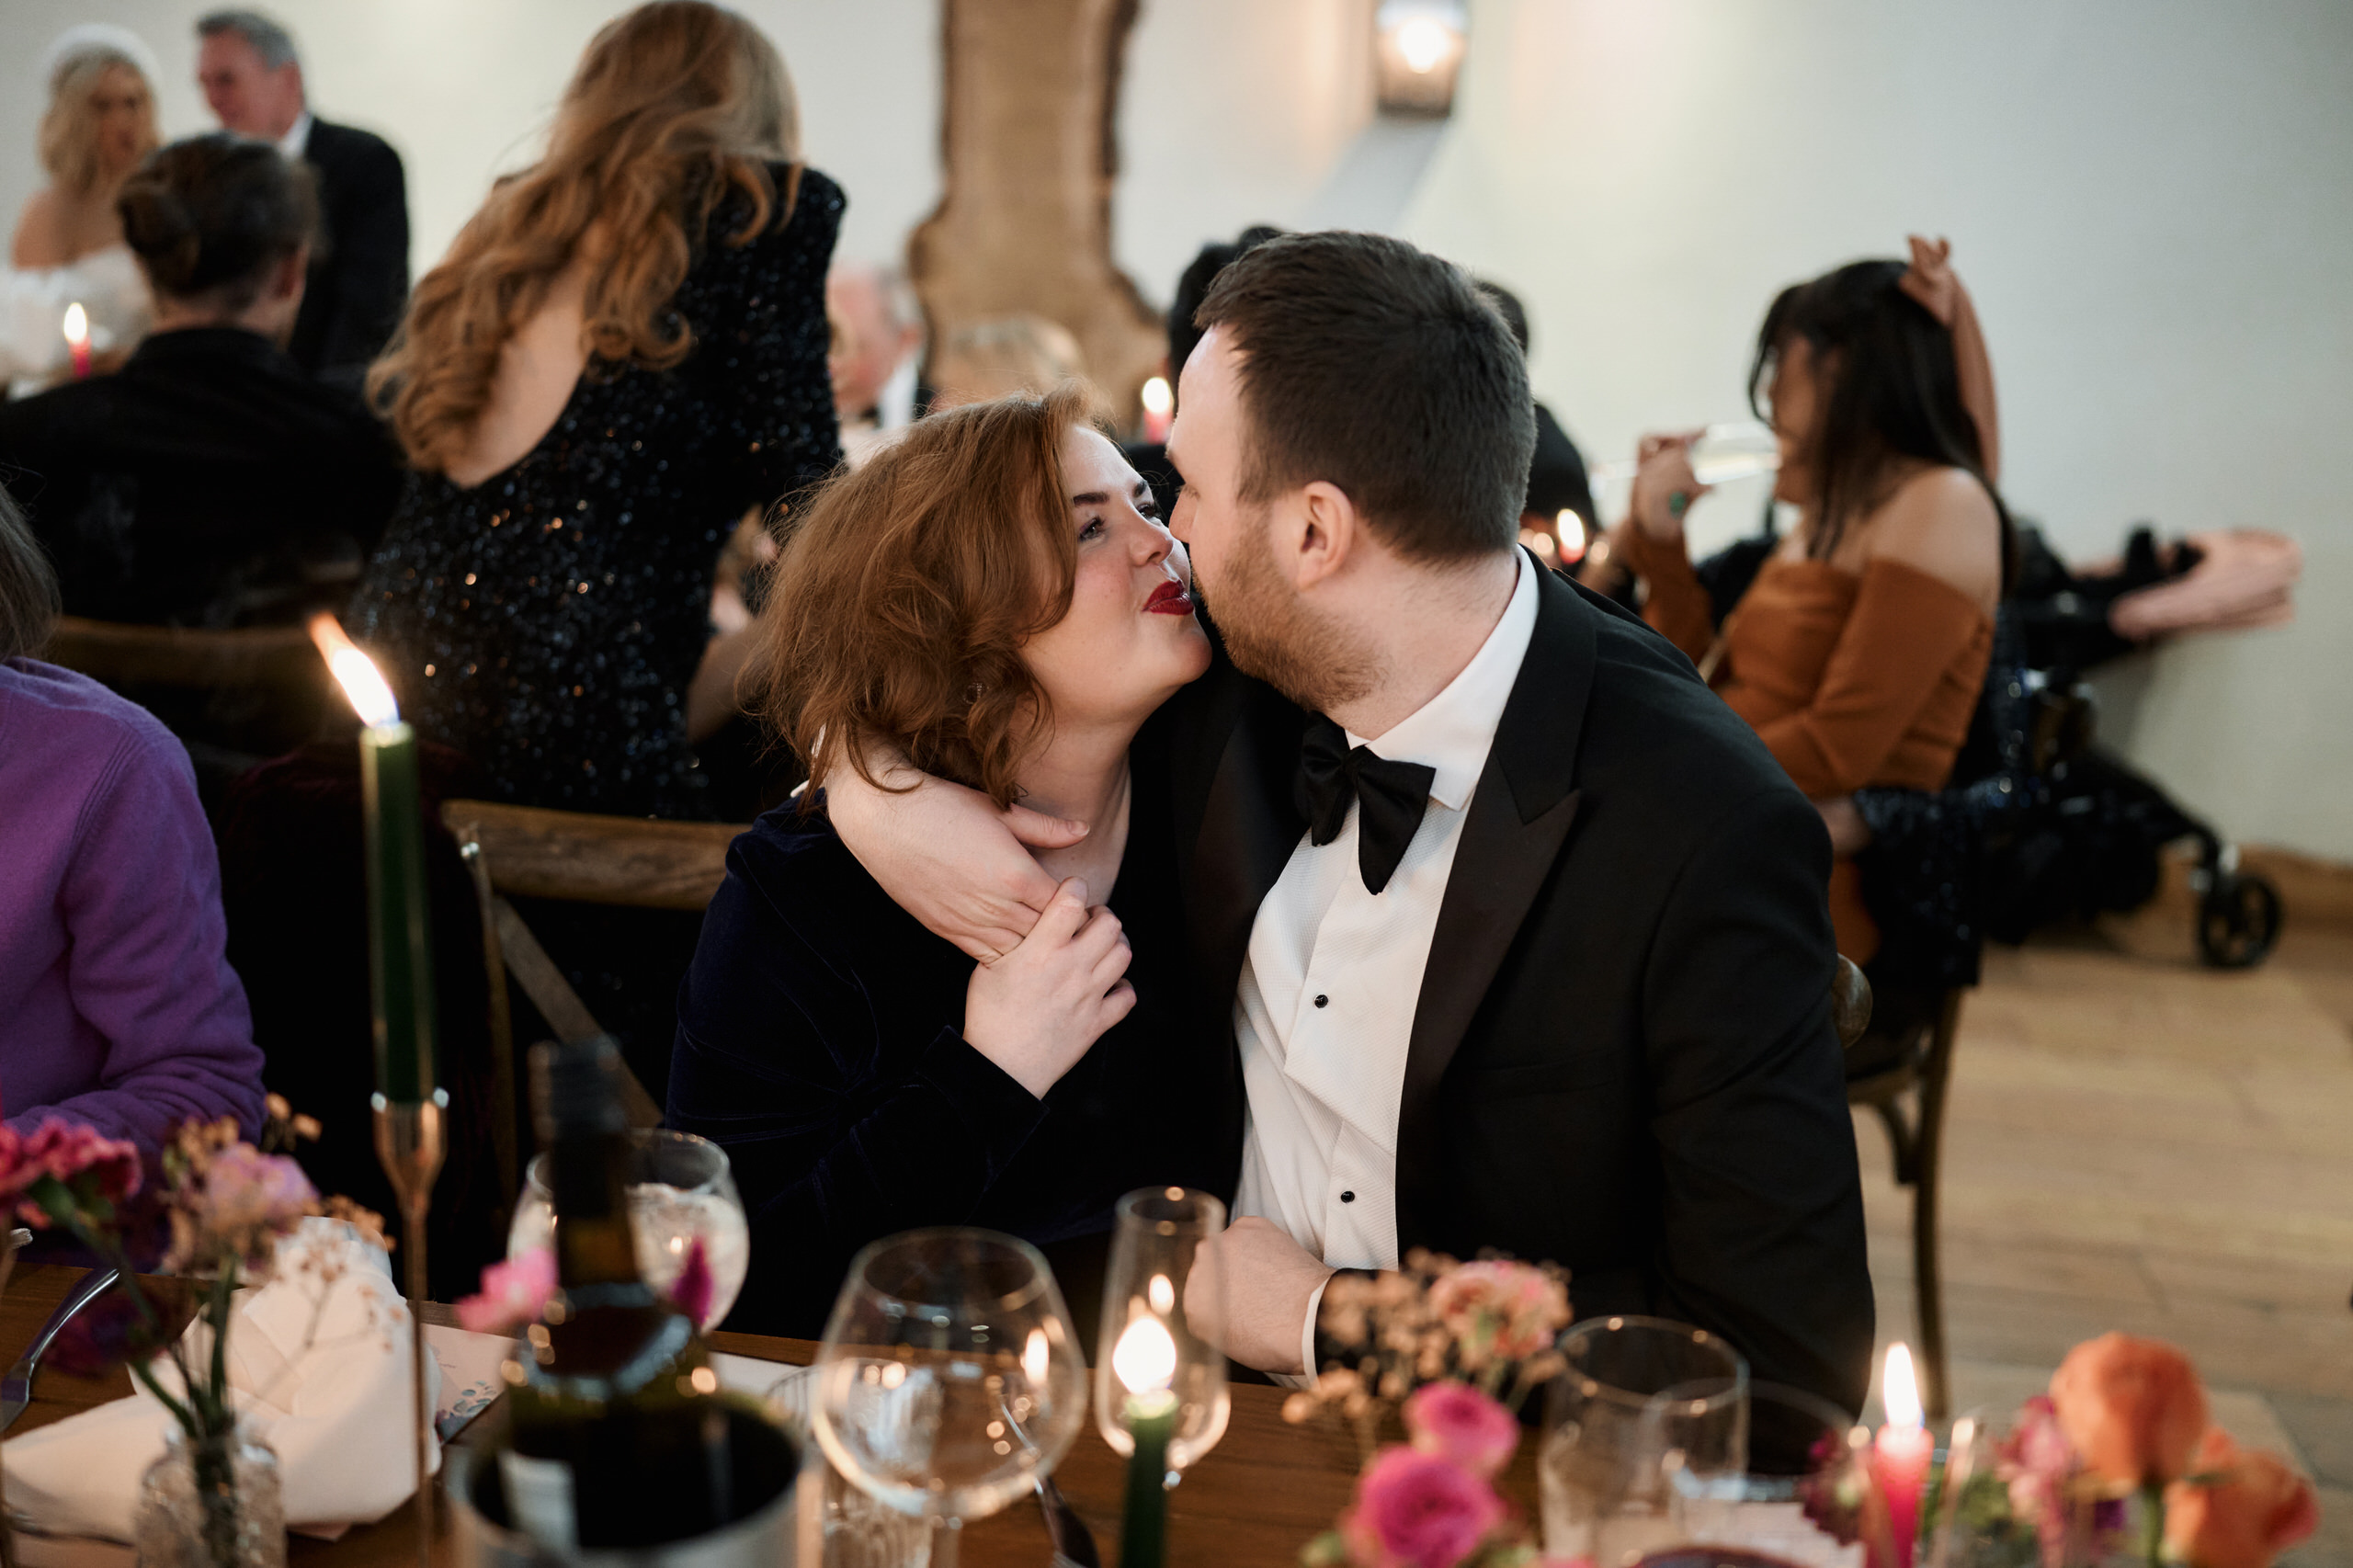 Two people kissing at a wedding party.